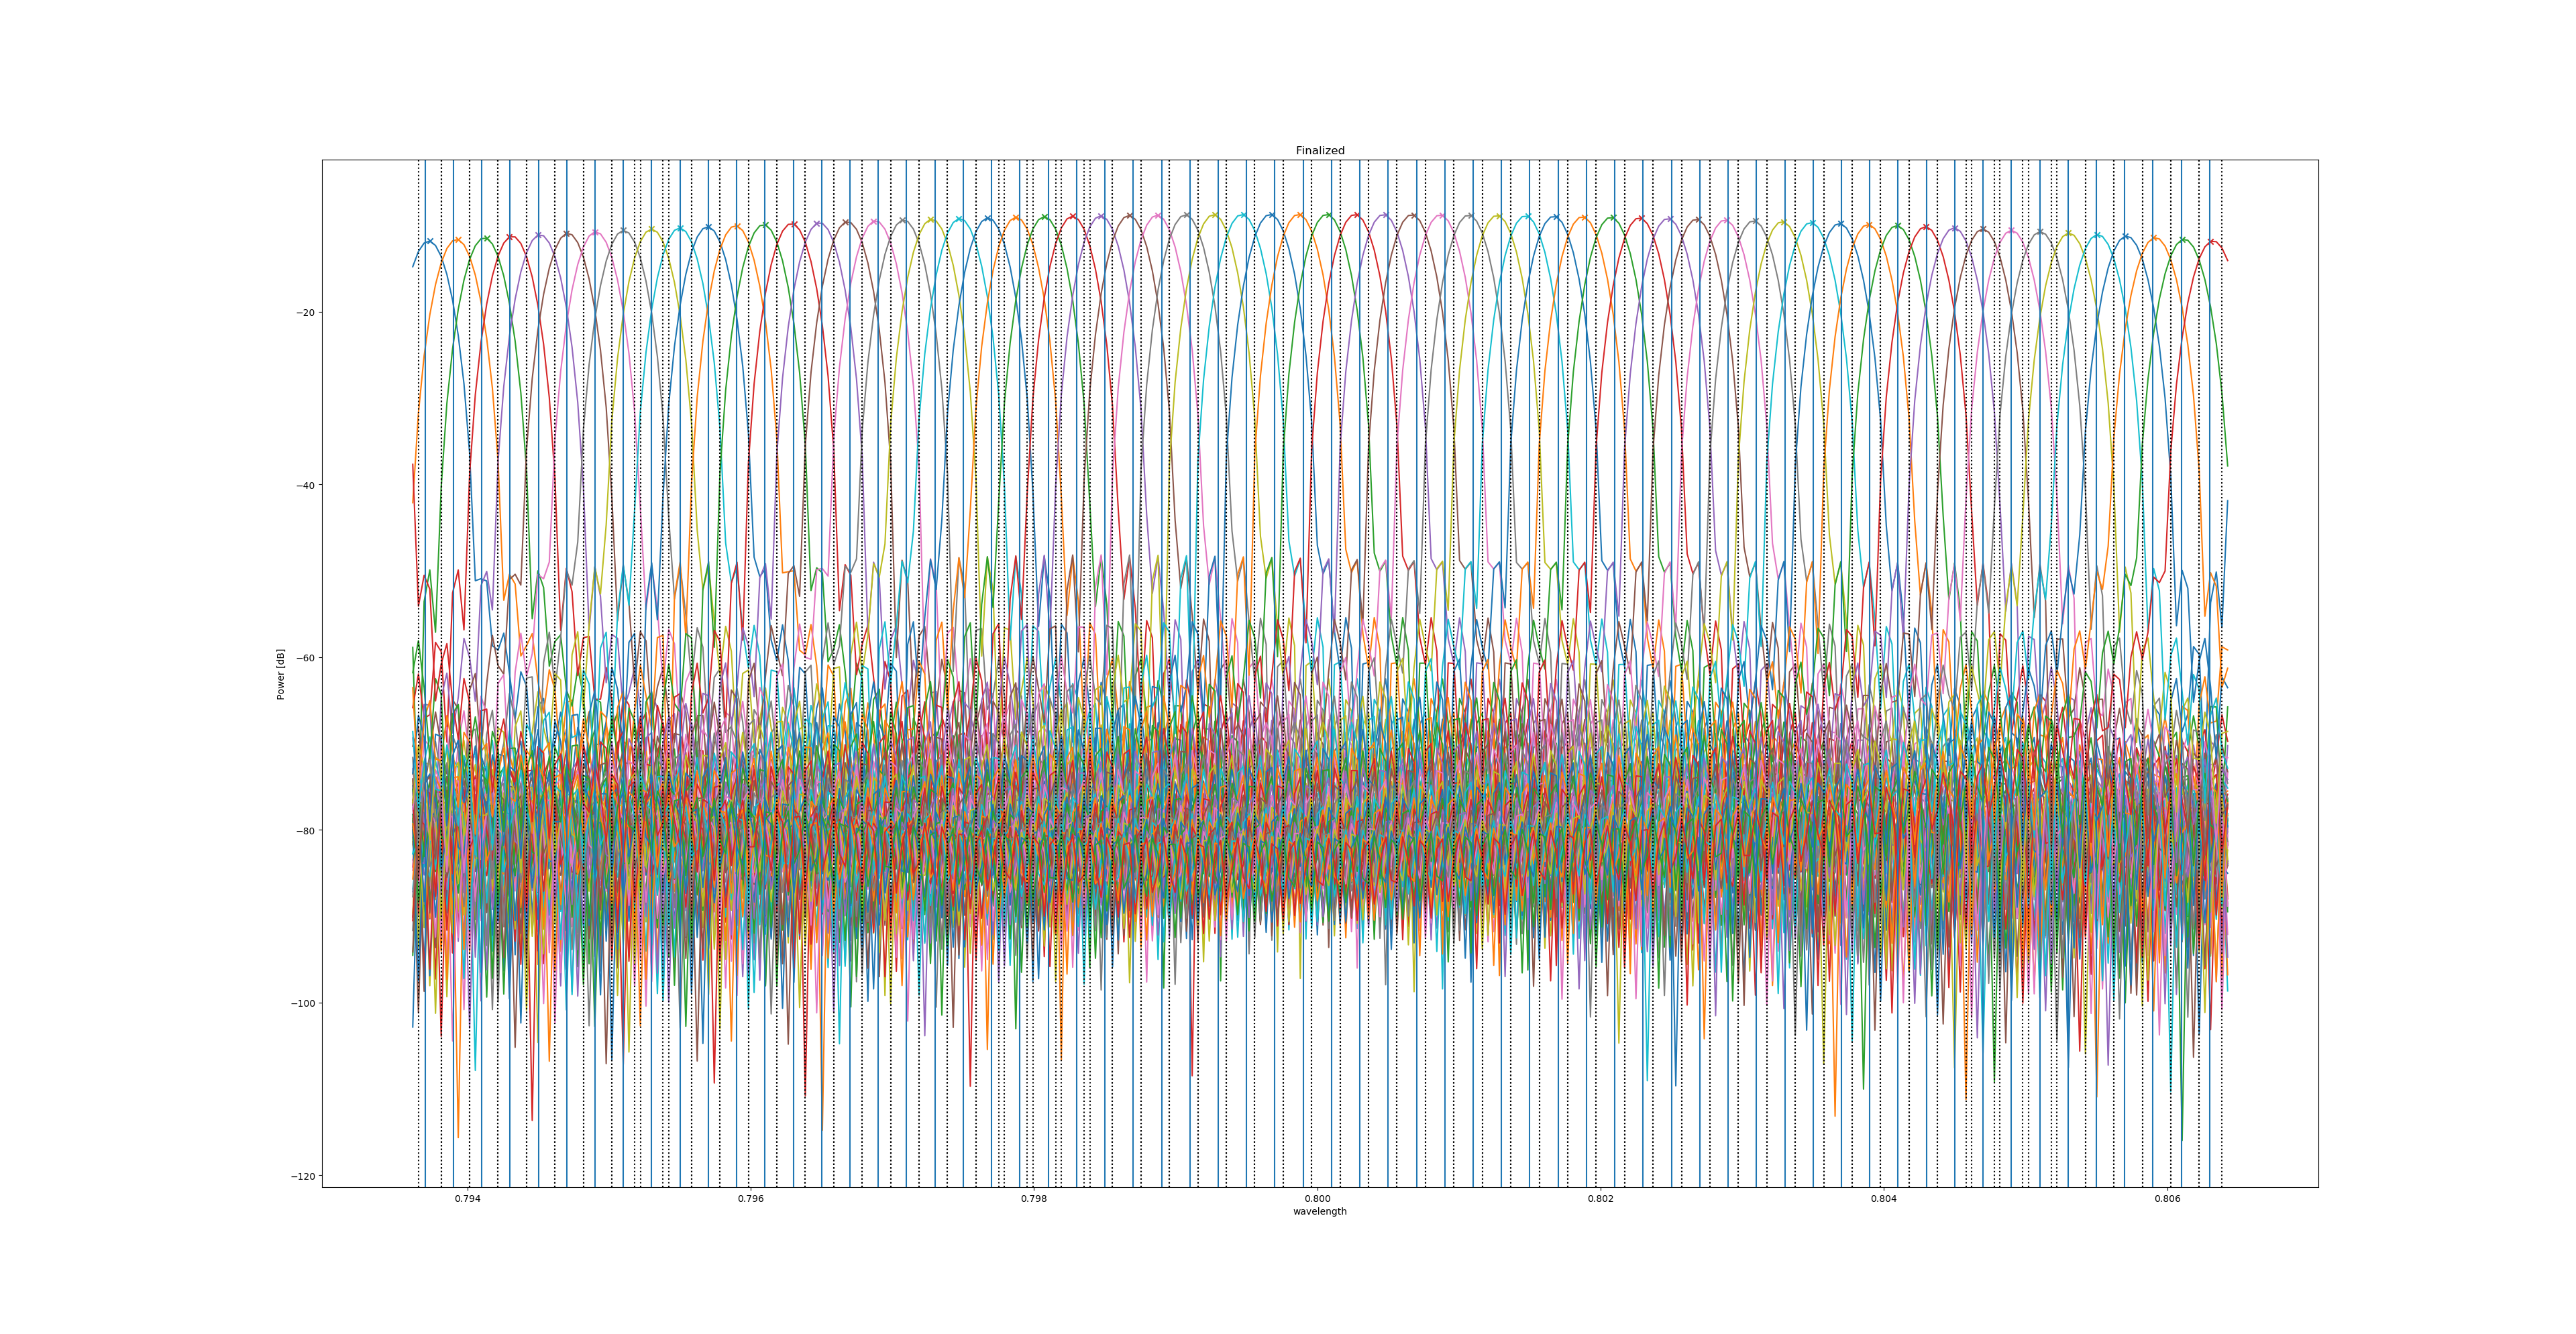 ../../../_images/output_spectrum_finalized.png